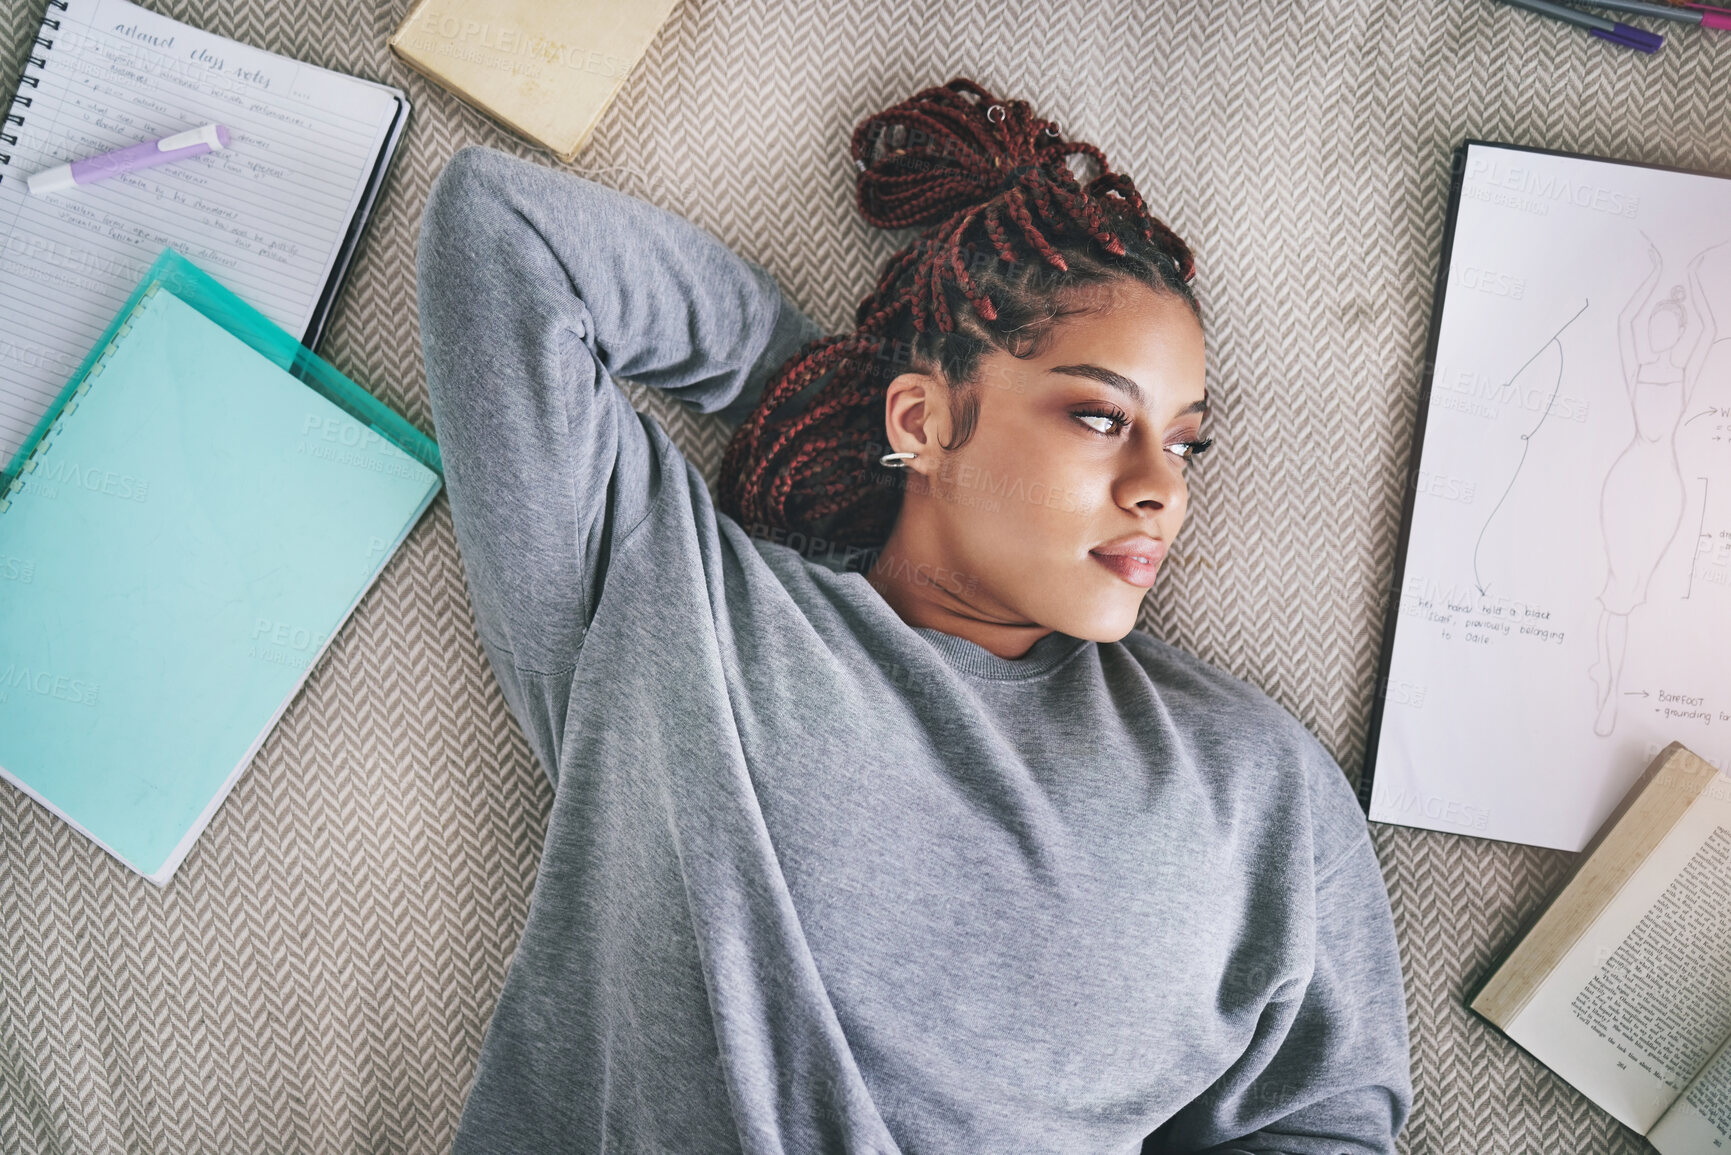 Buy stock photo Design, fashion student and black woman on bed lost in ideas. Relax, thinking and inspiration, thoughtful young designer on break from school work. Creative student with books and drawing in bedroom.